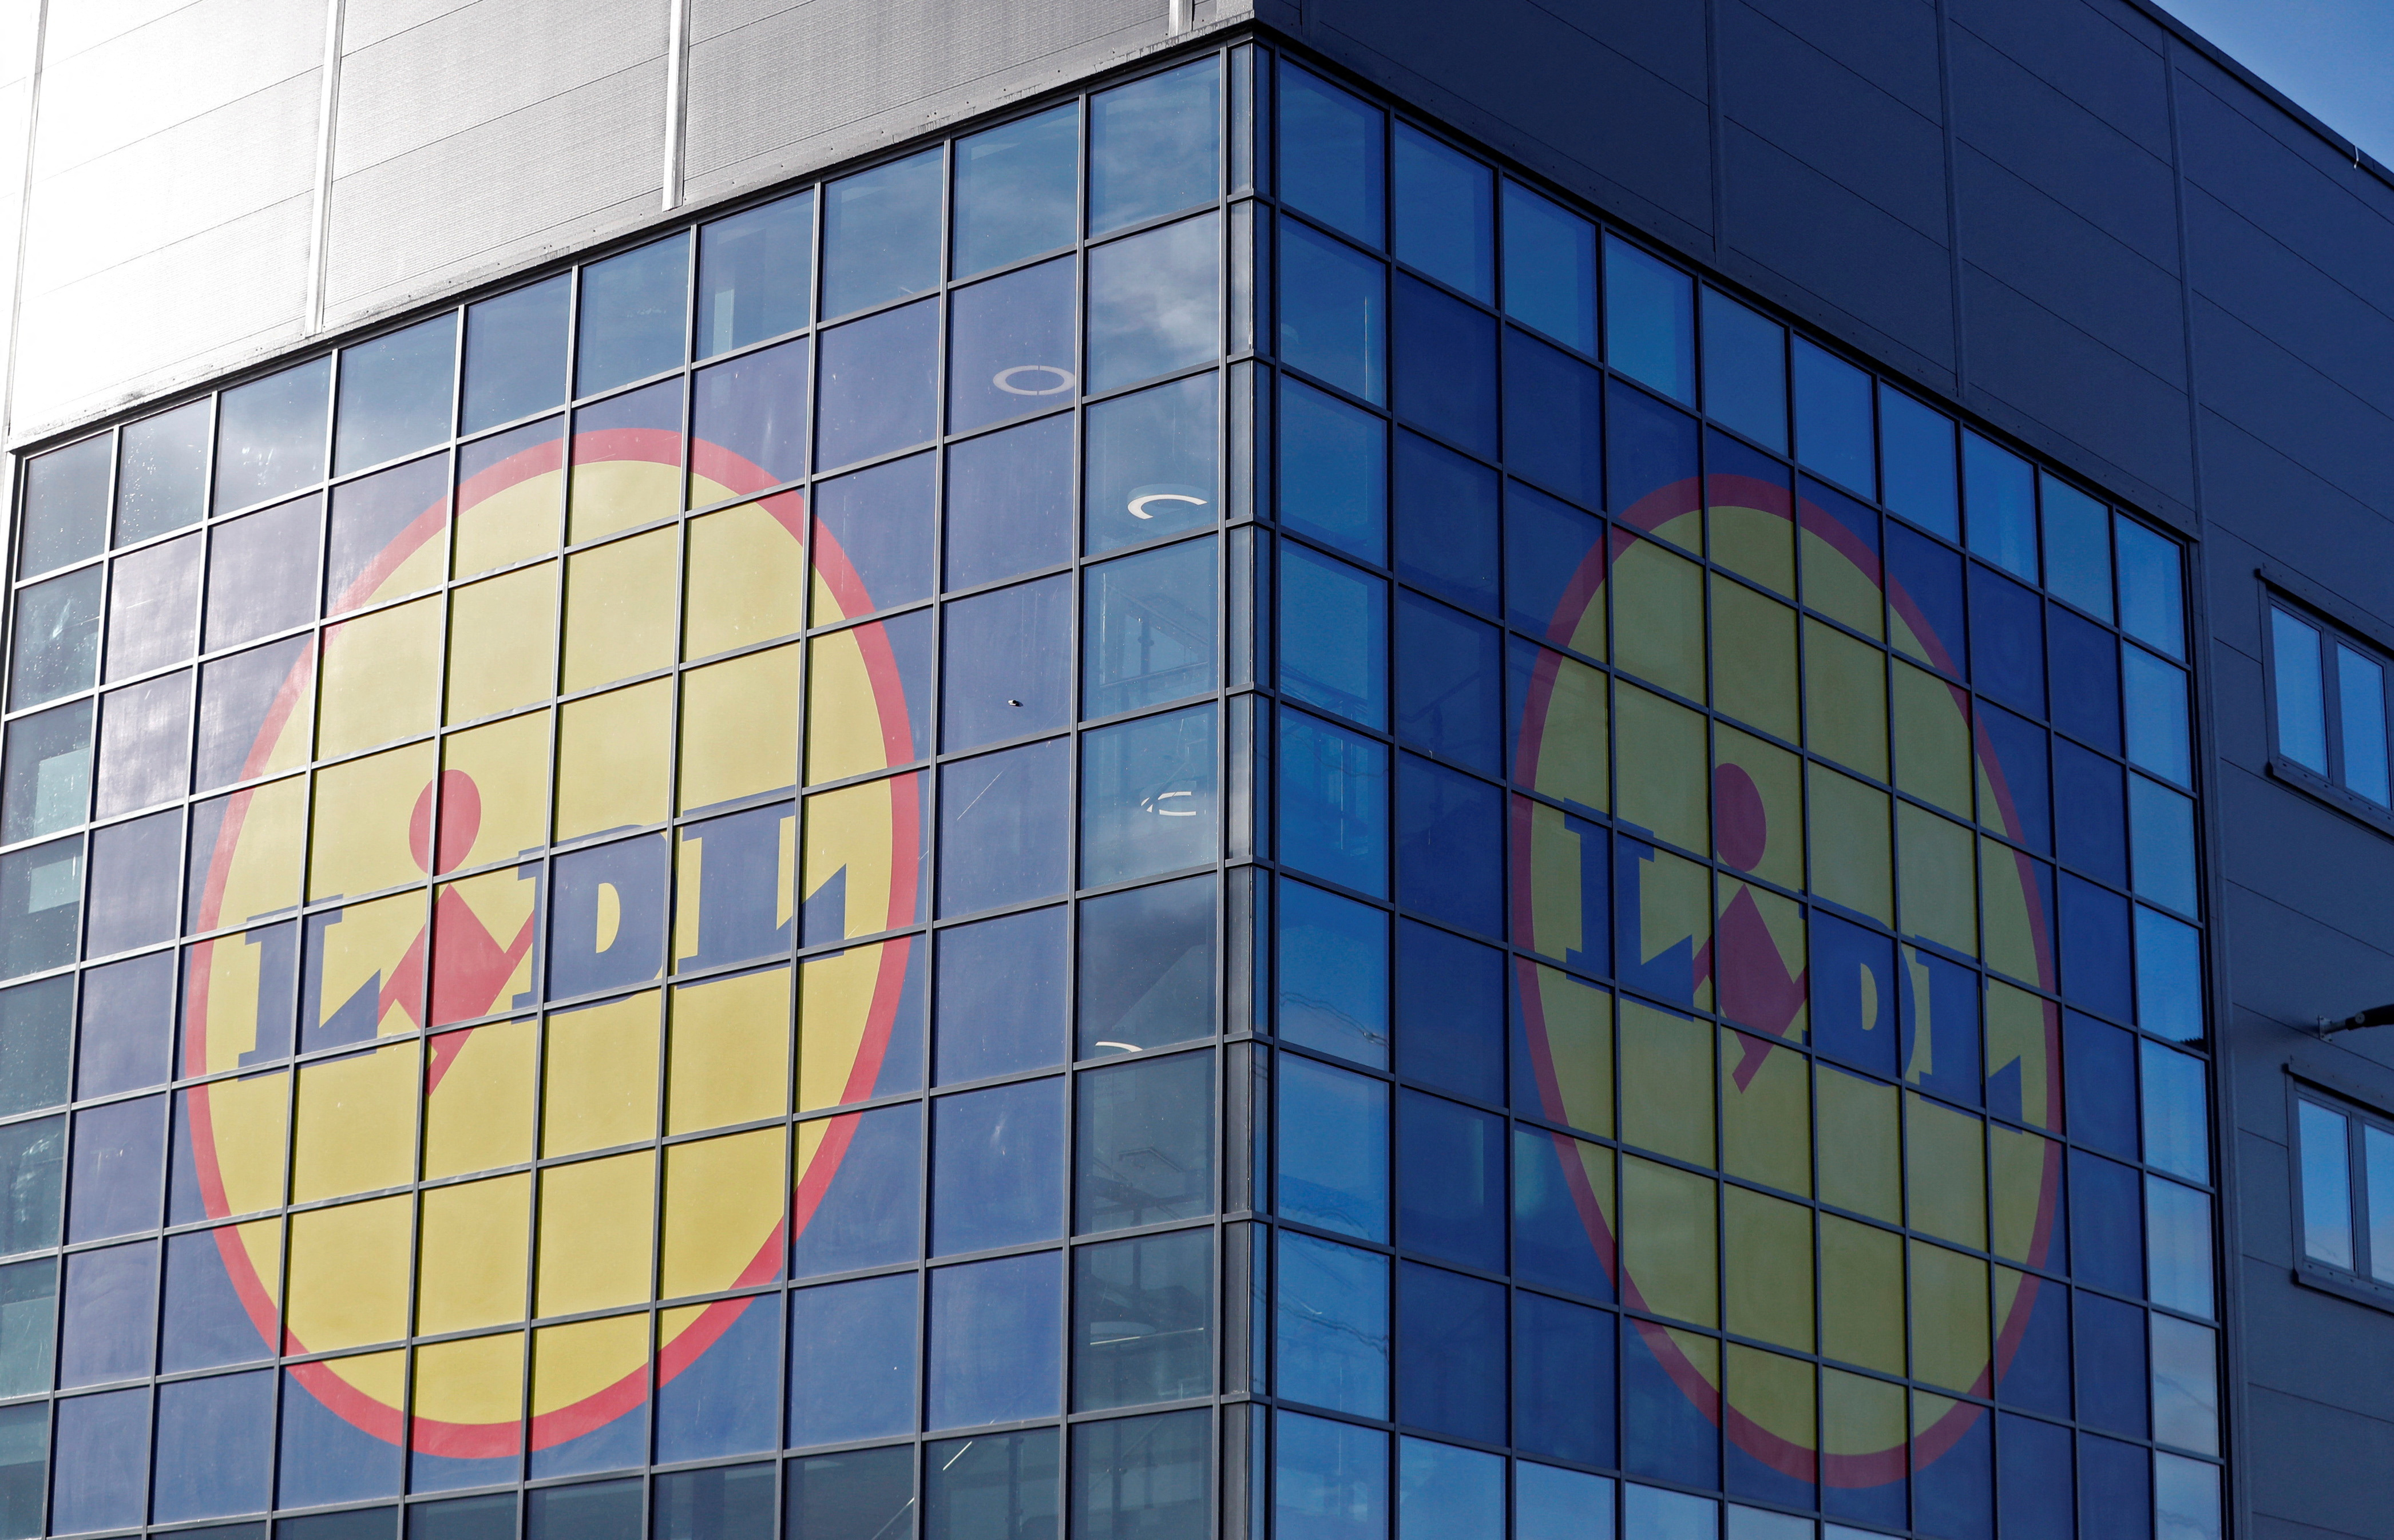 Lidl's logos are seen on the exterior of its new Scottish distribution centre as it commences operations in Motherwell, Scotland